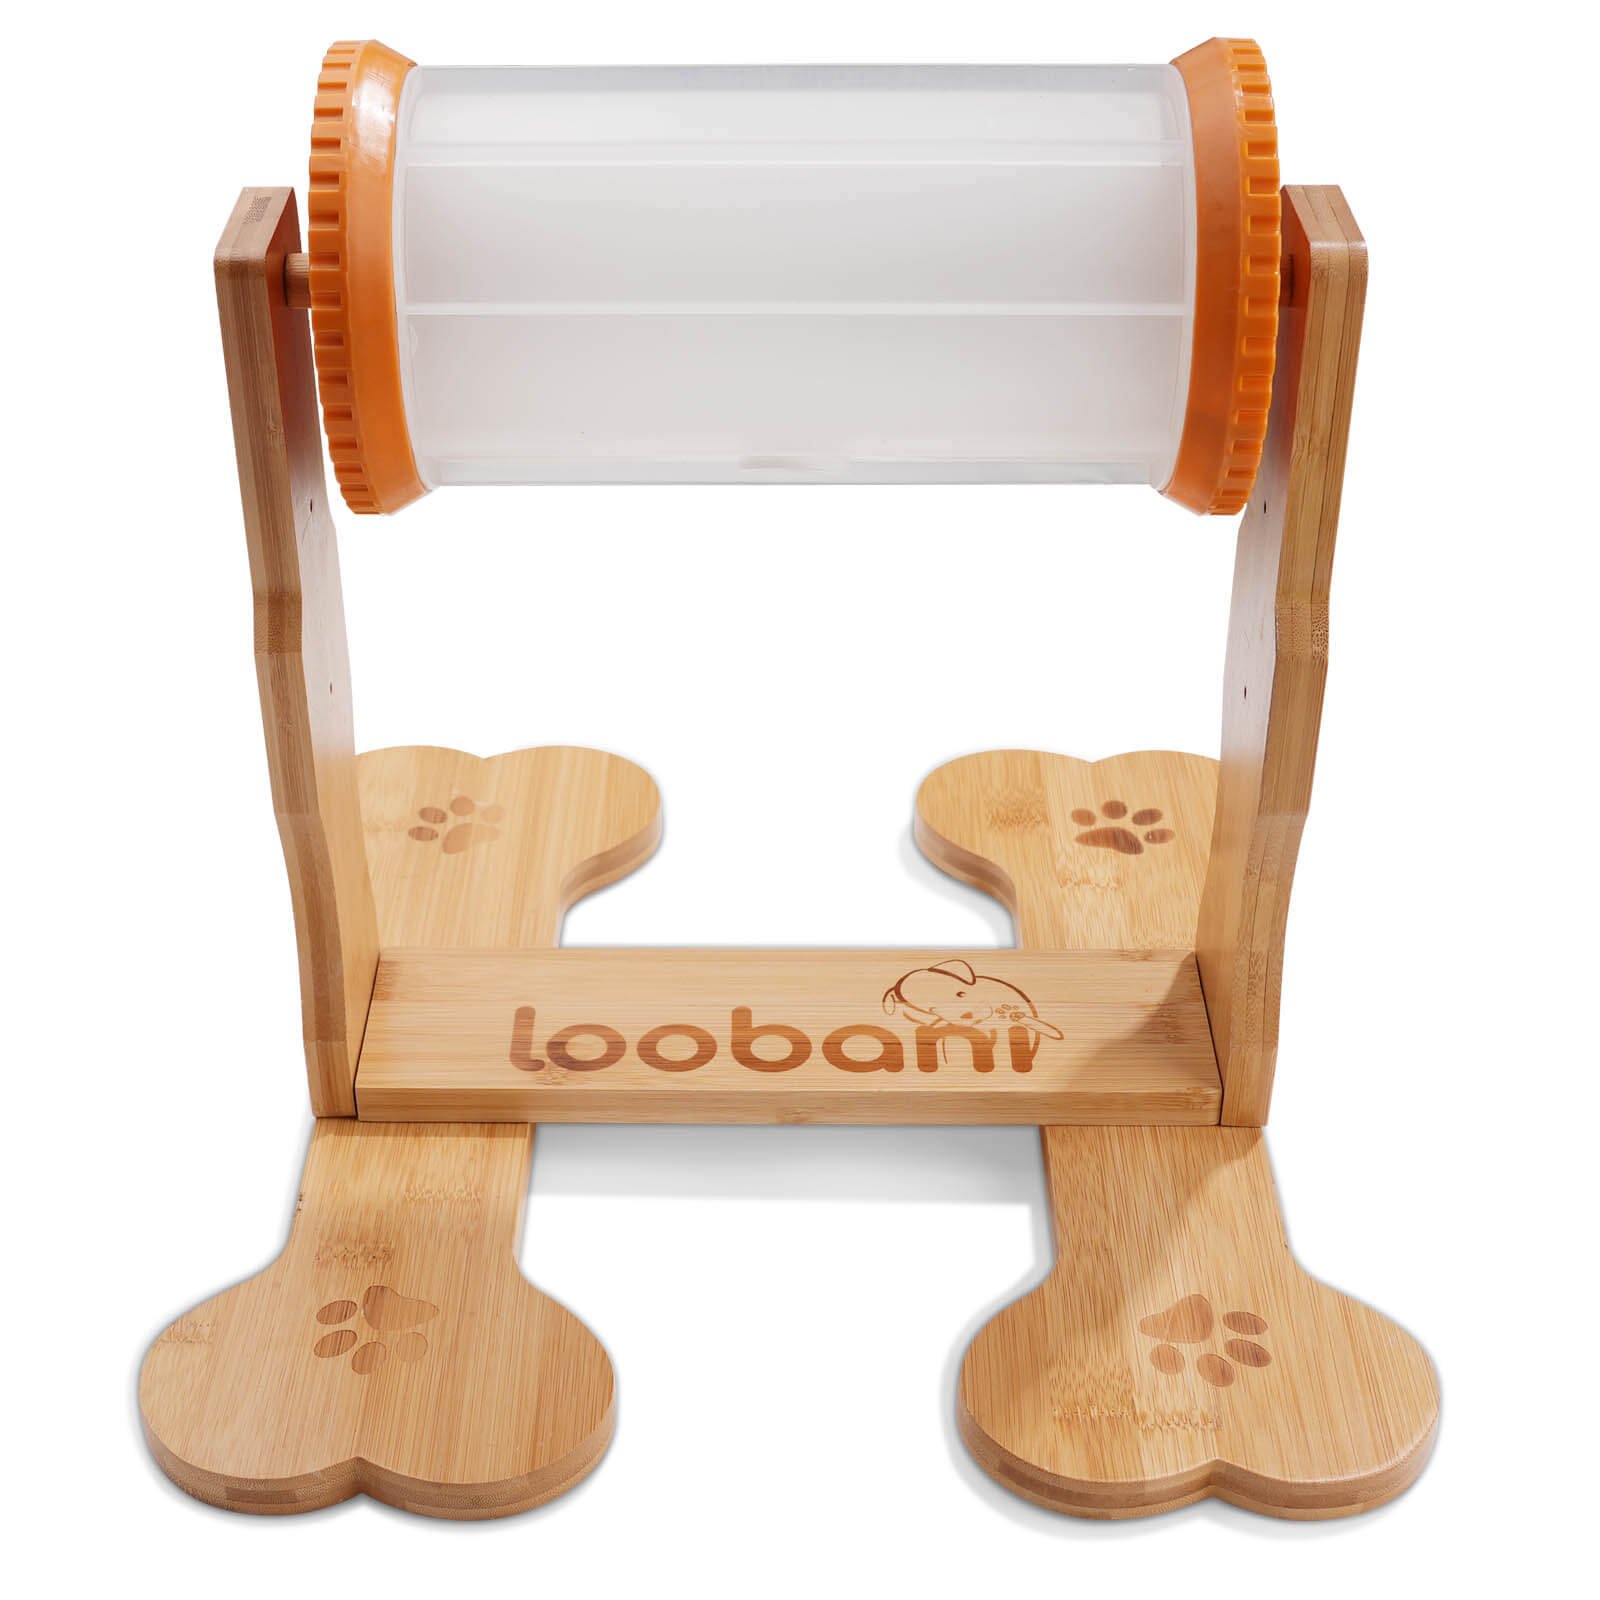 LOOBANI Dogs Food Puzzle Feeder Toys for IQ Training & Mental Enrichment,  Intera